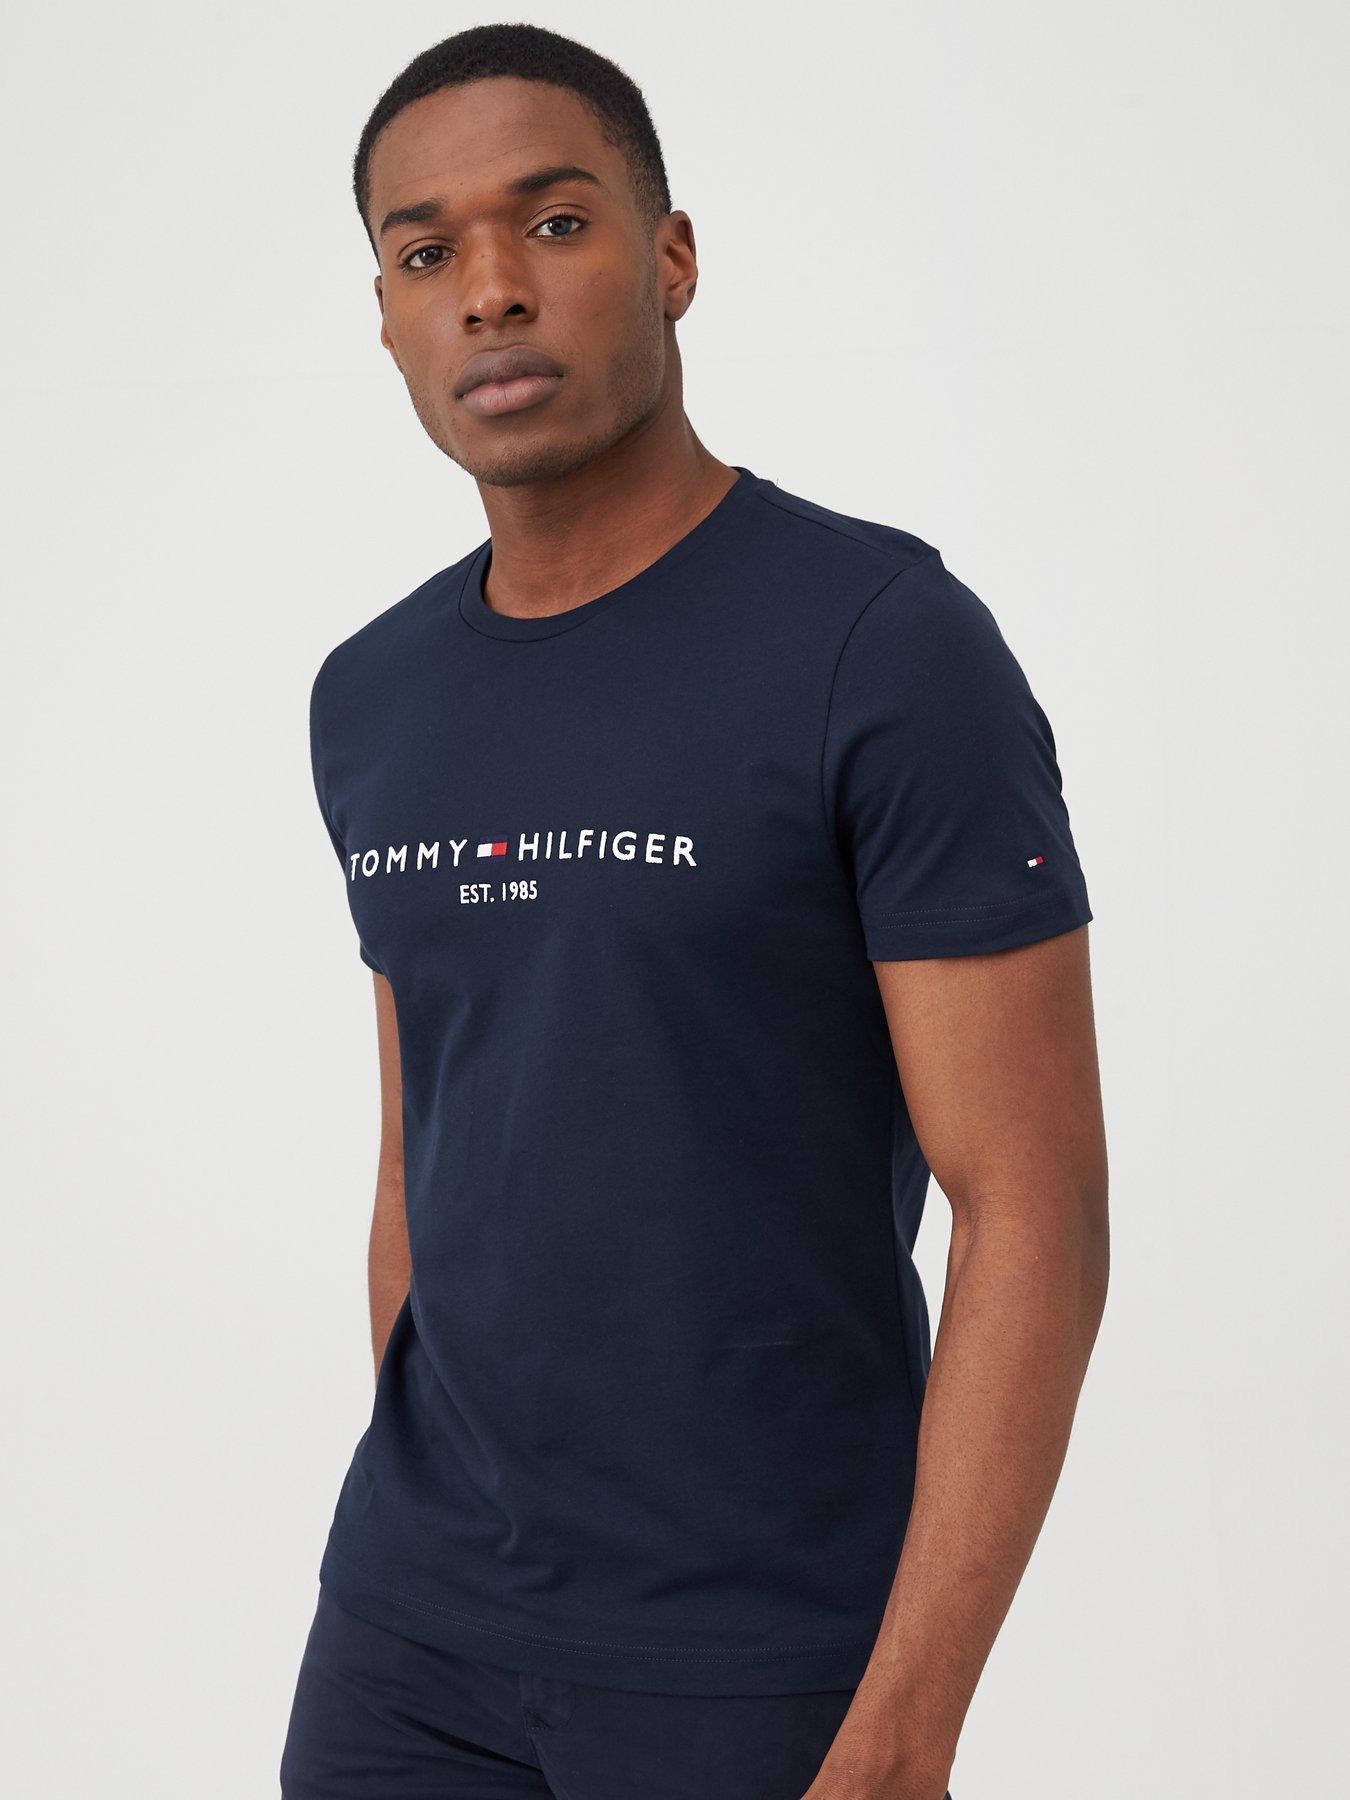 4 | Tommy hilfiger | T-shirts polos | Men www.very.co.uk